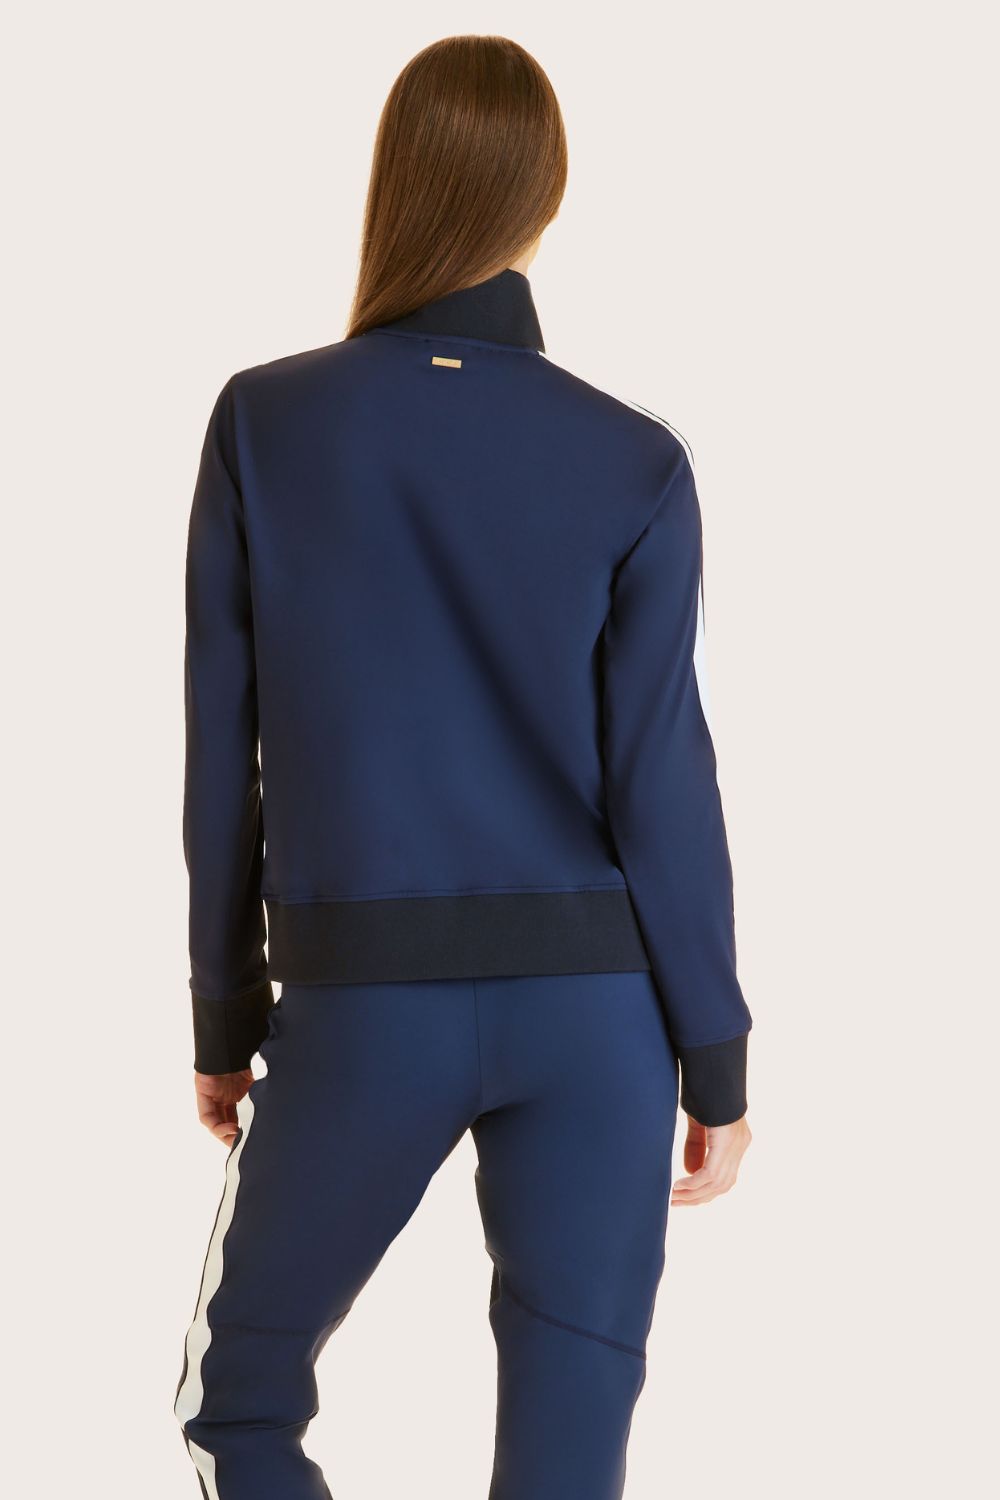 Alala women's track jacket in navy with white stripe